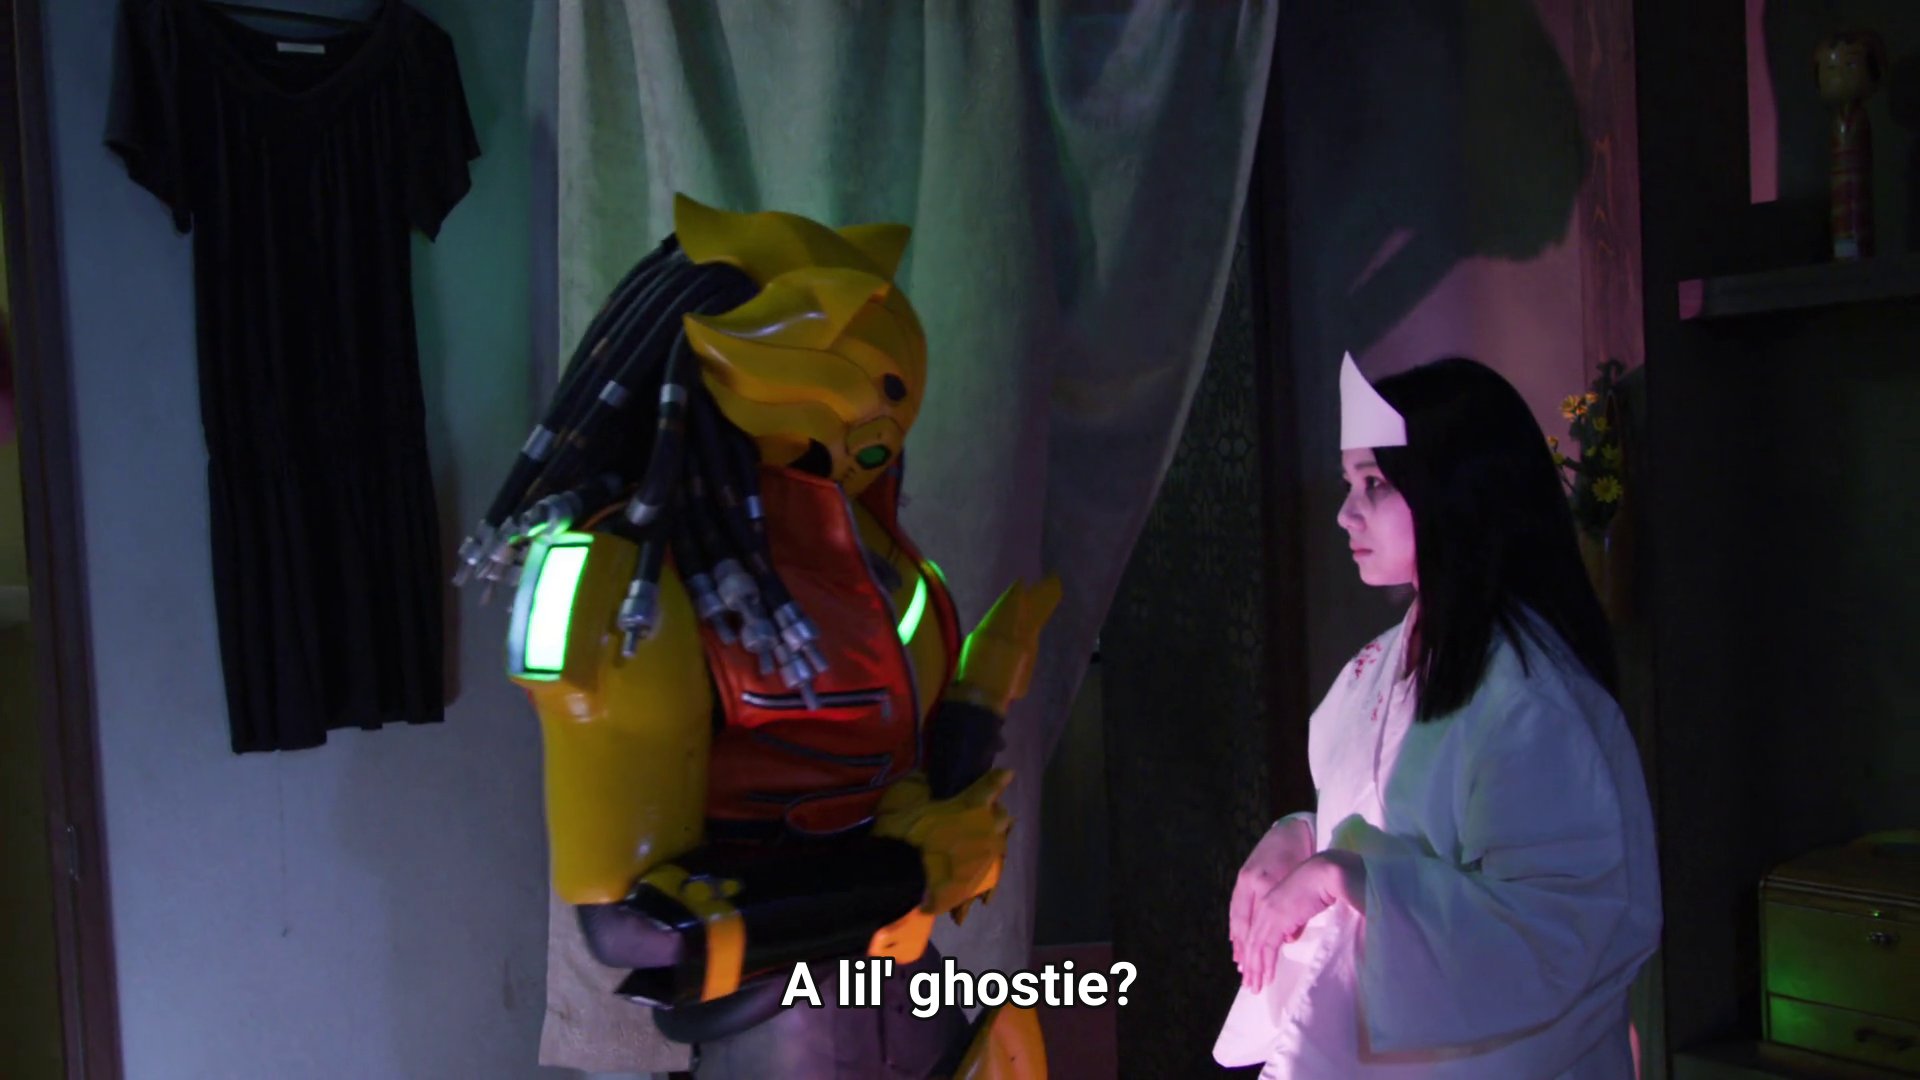 Gaon in a cheap haunted house looking at a woman dressed as a ghost.  Gaon: A lil ghostie?